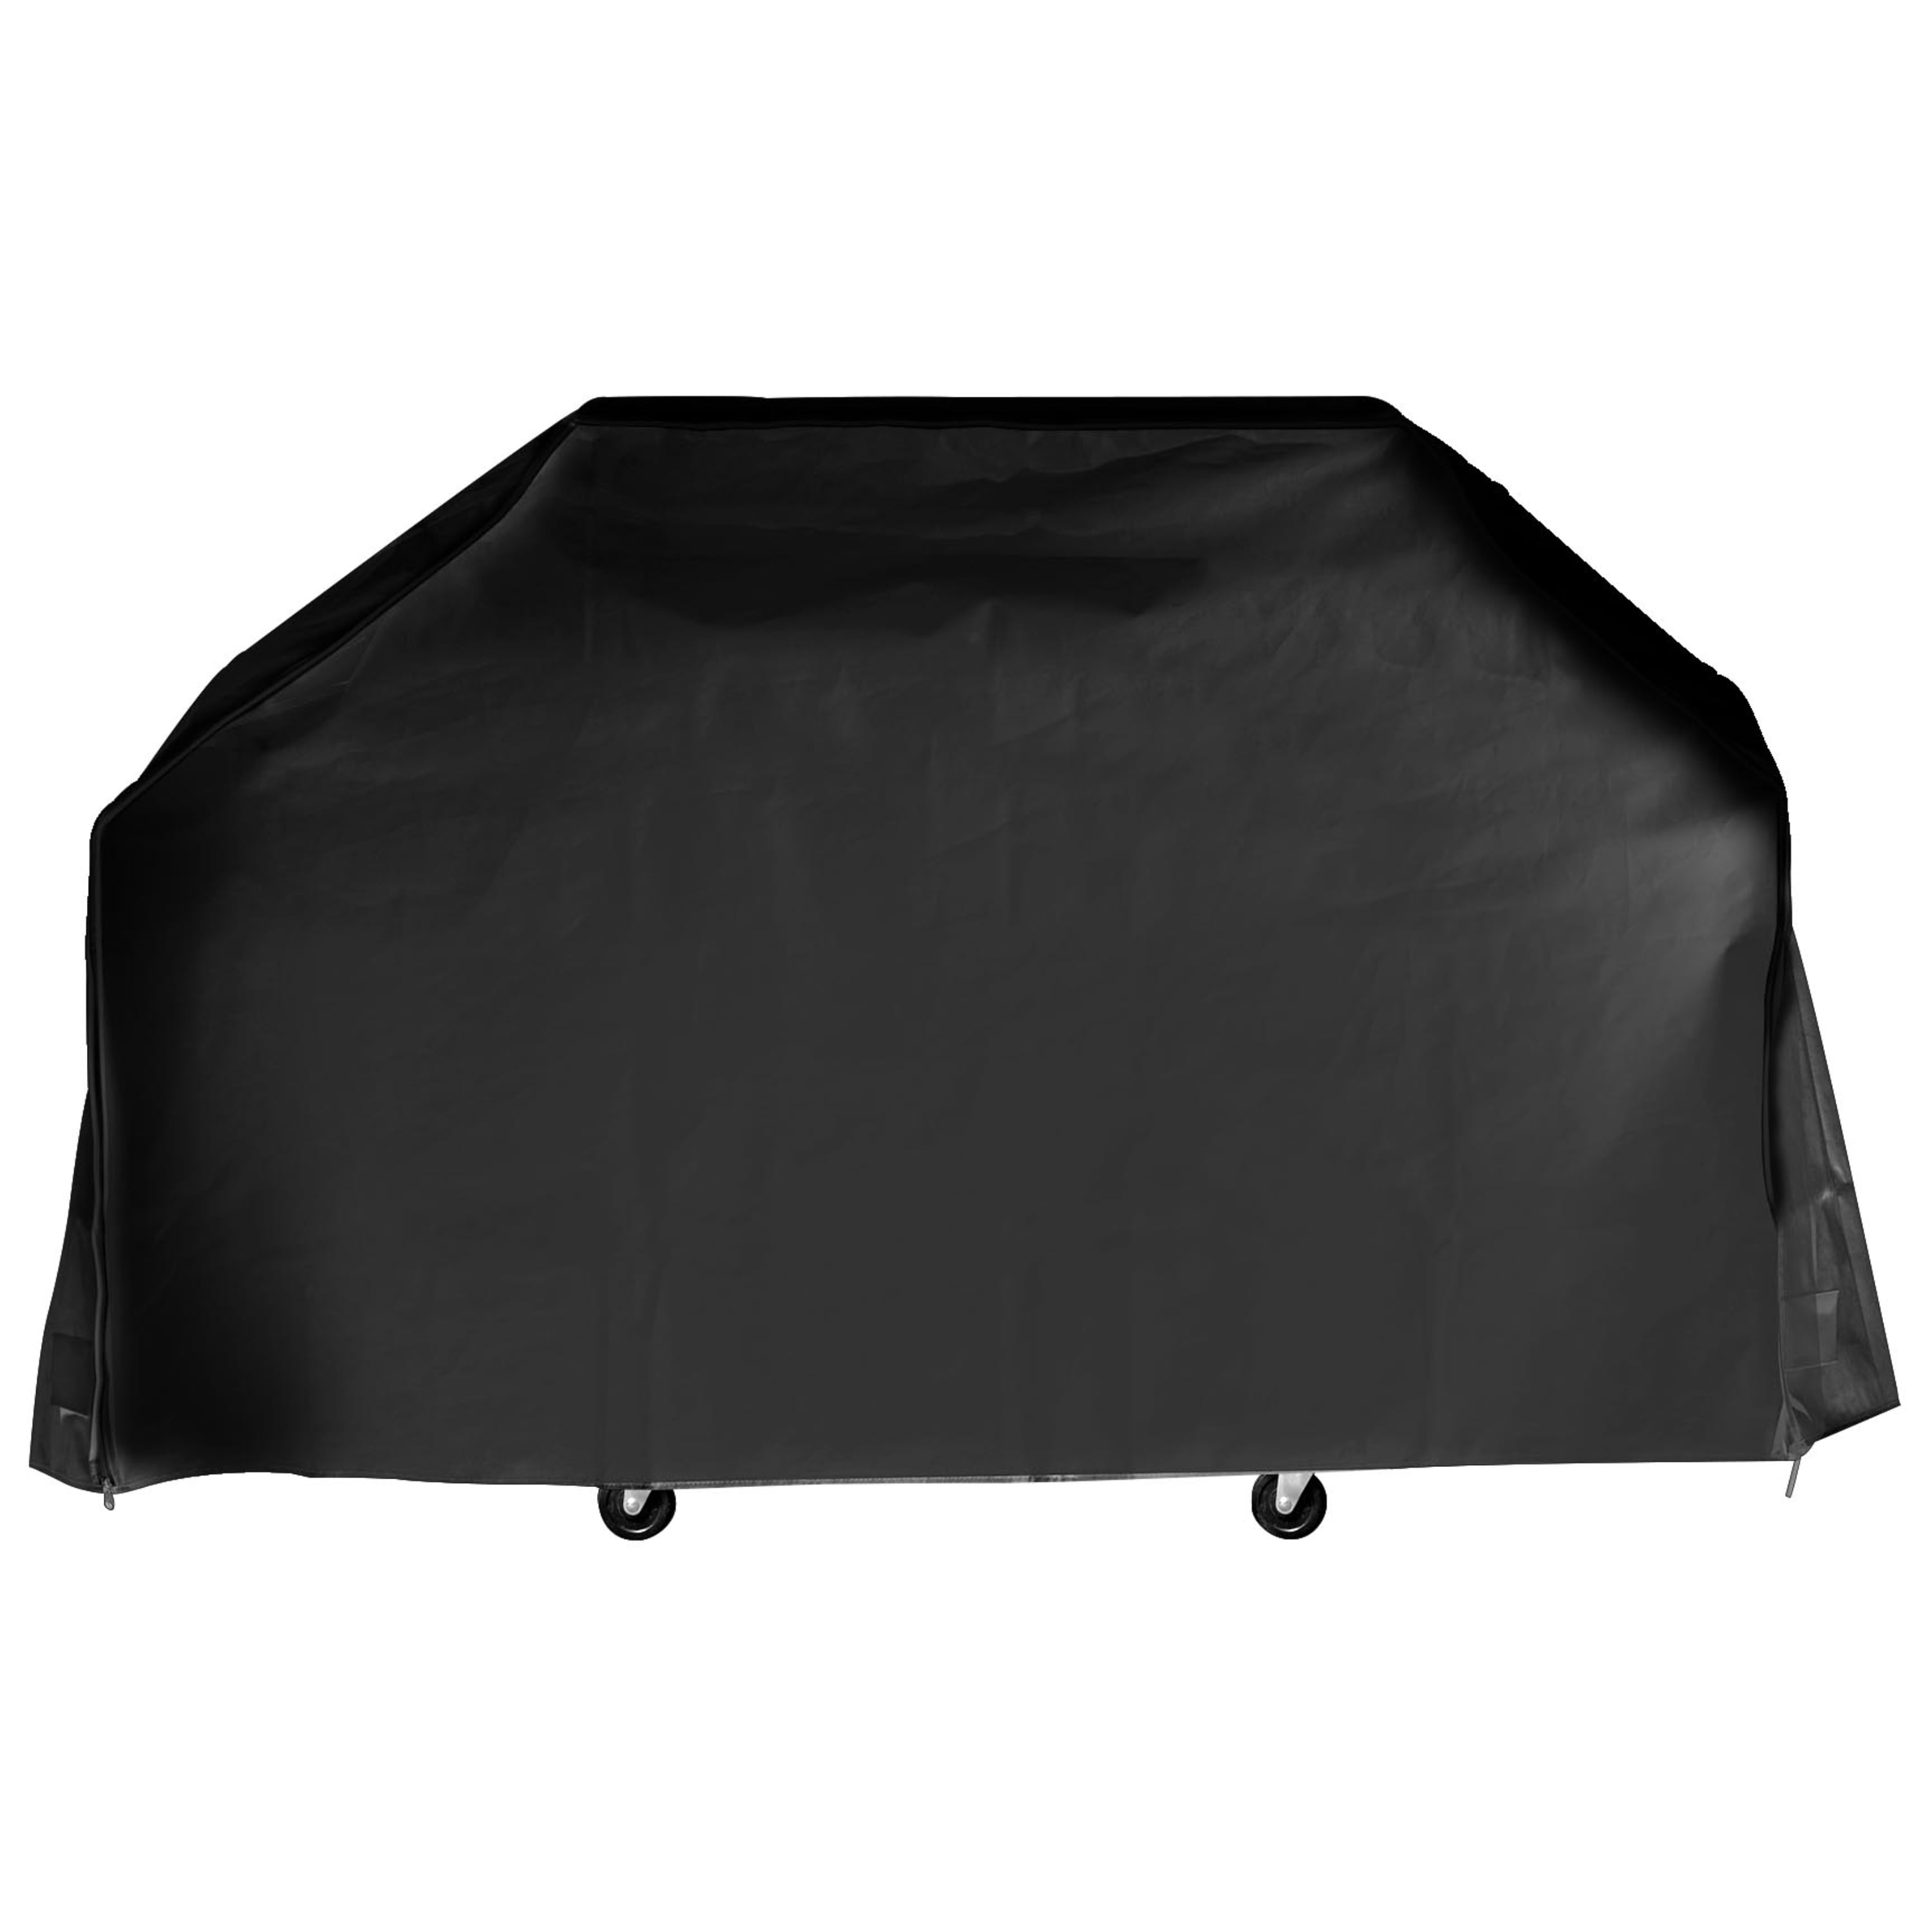 Mr. BarBQ Armor All 72 Inch Grill Cover